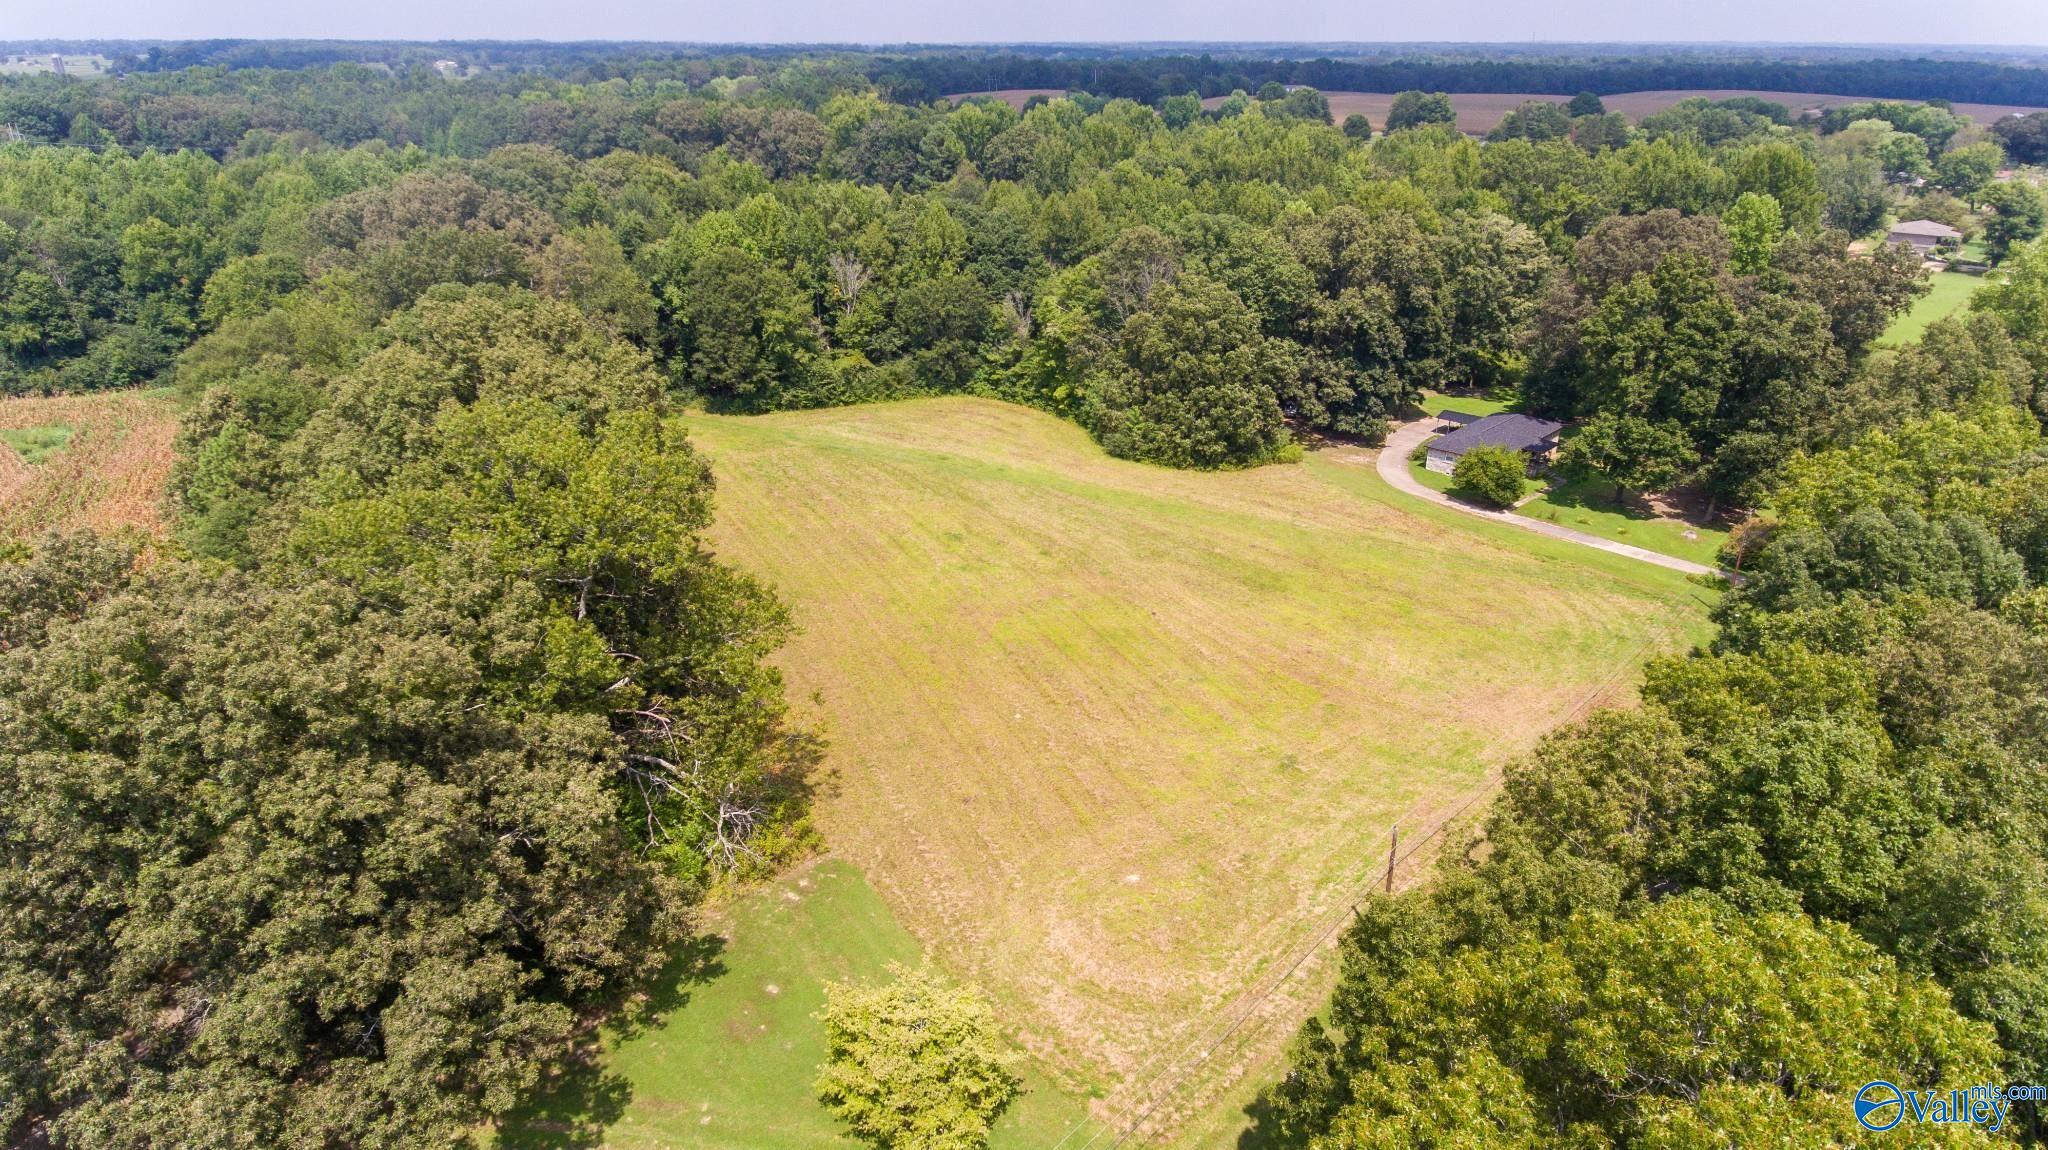 Property: Tract 7 Hilldale Church Road,Fayetteville, TN